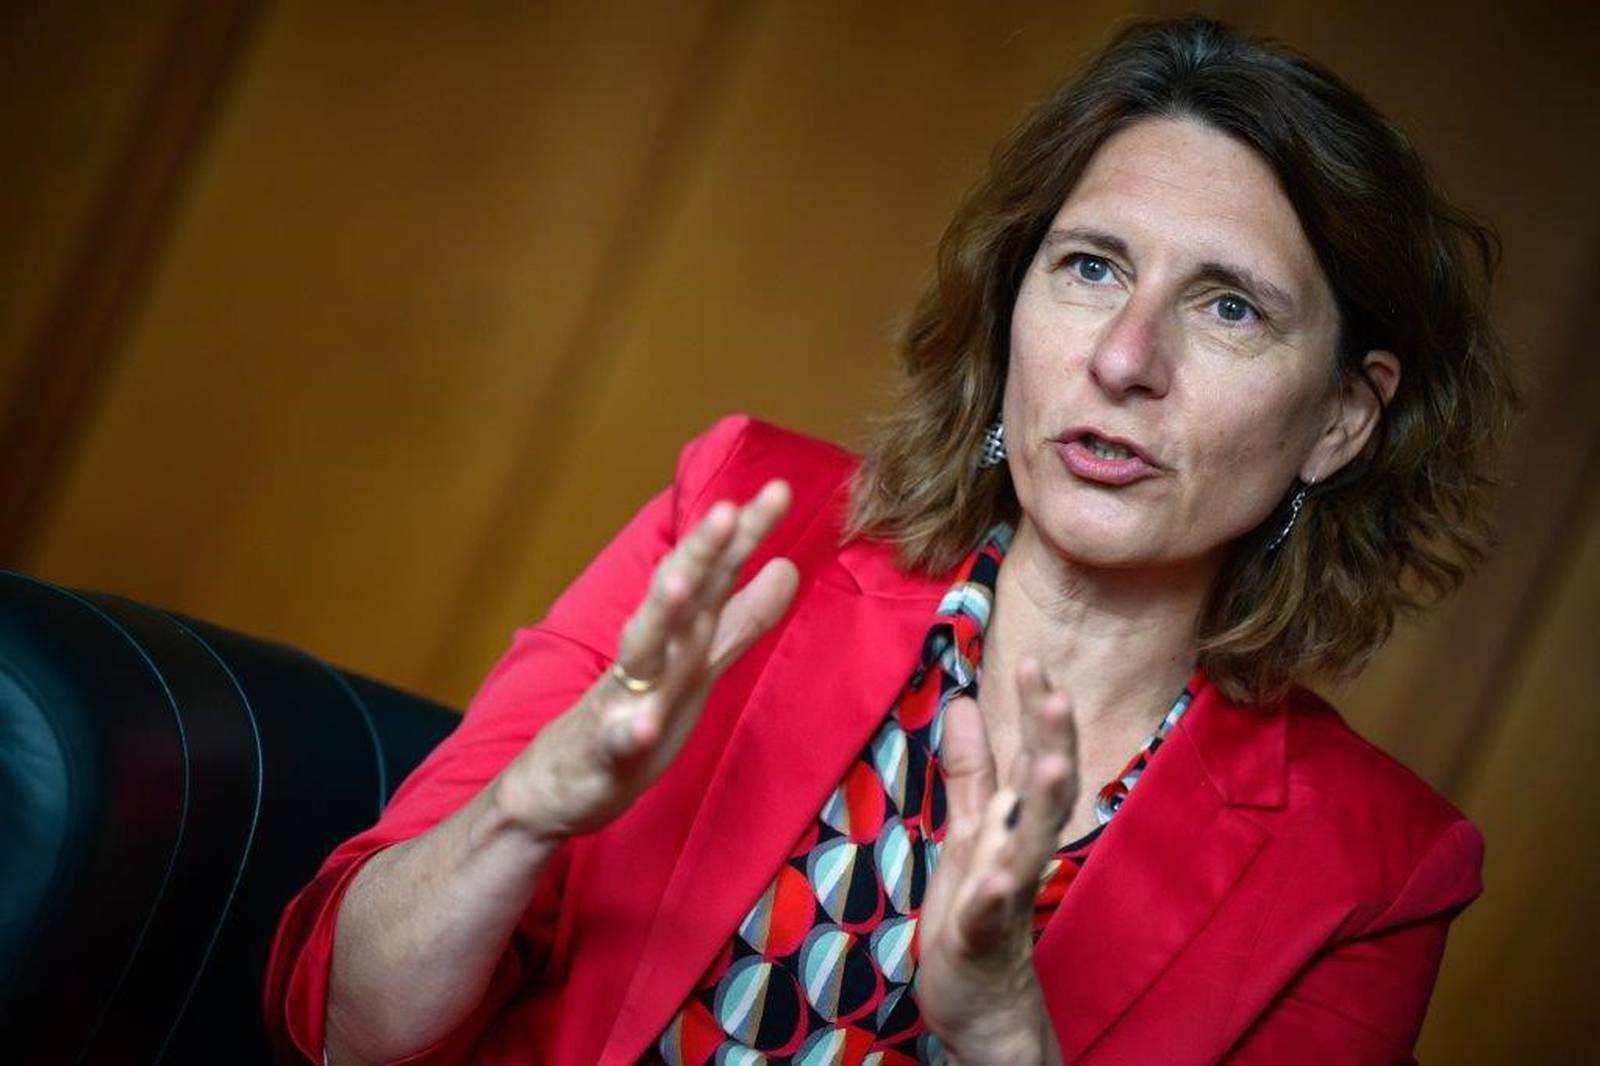 Deike Potzel, special adviser to Germany's foreign minister for the Middle East